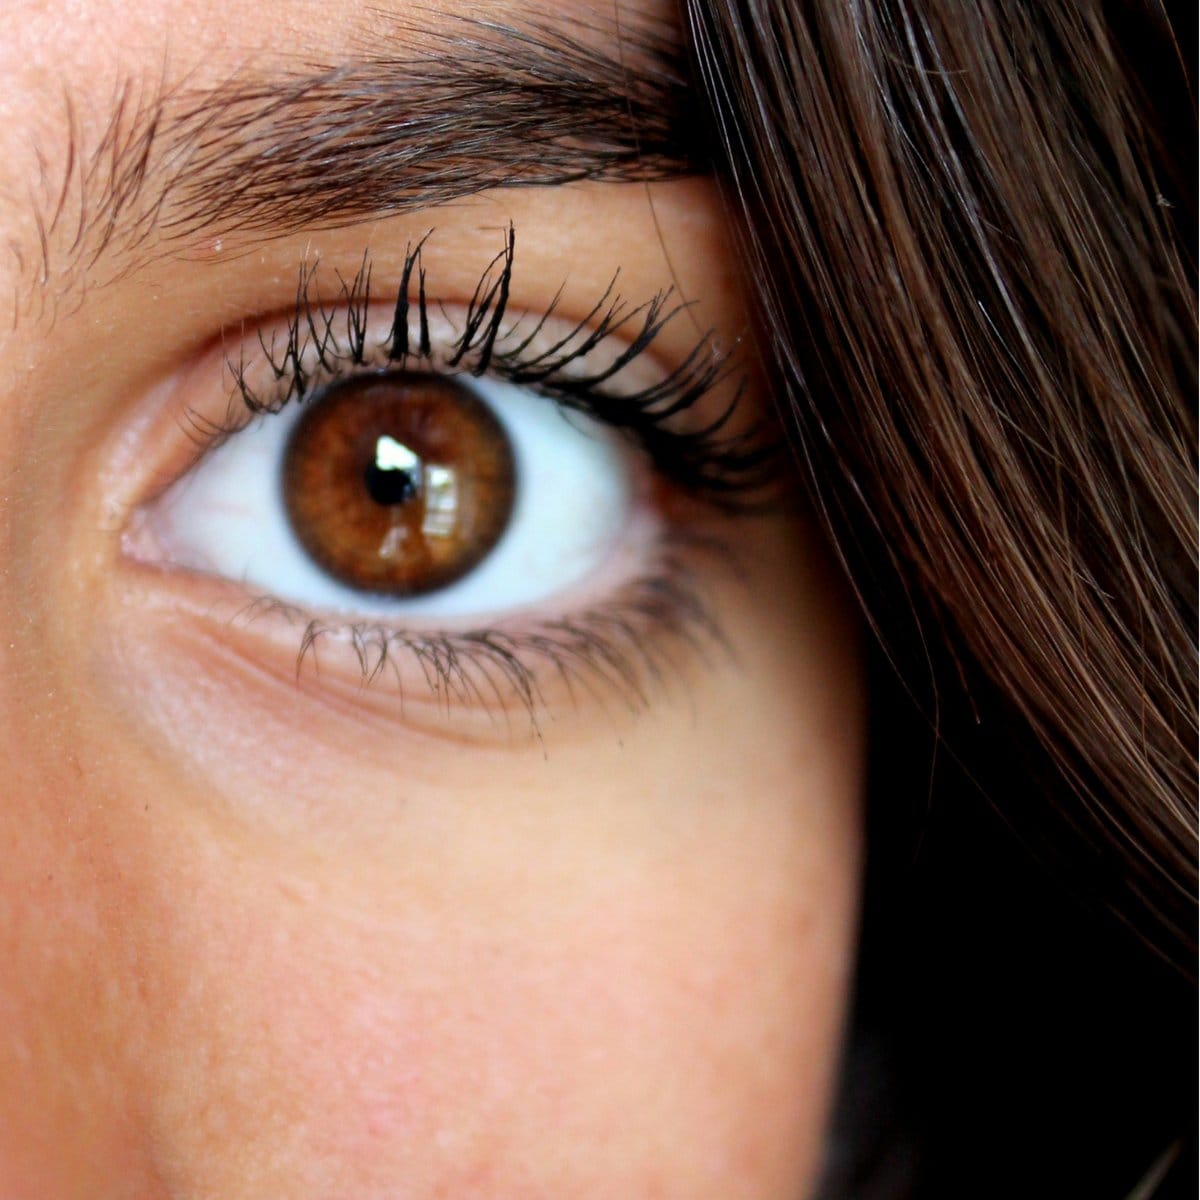 What Causes Under-eye Bags? And How Can I Get Rid Of Them?